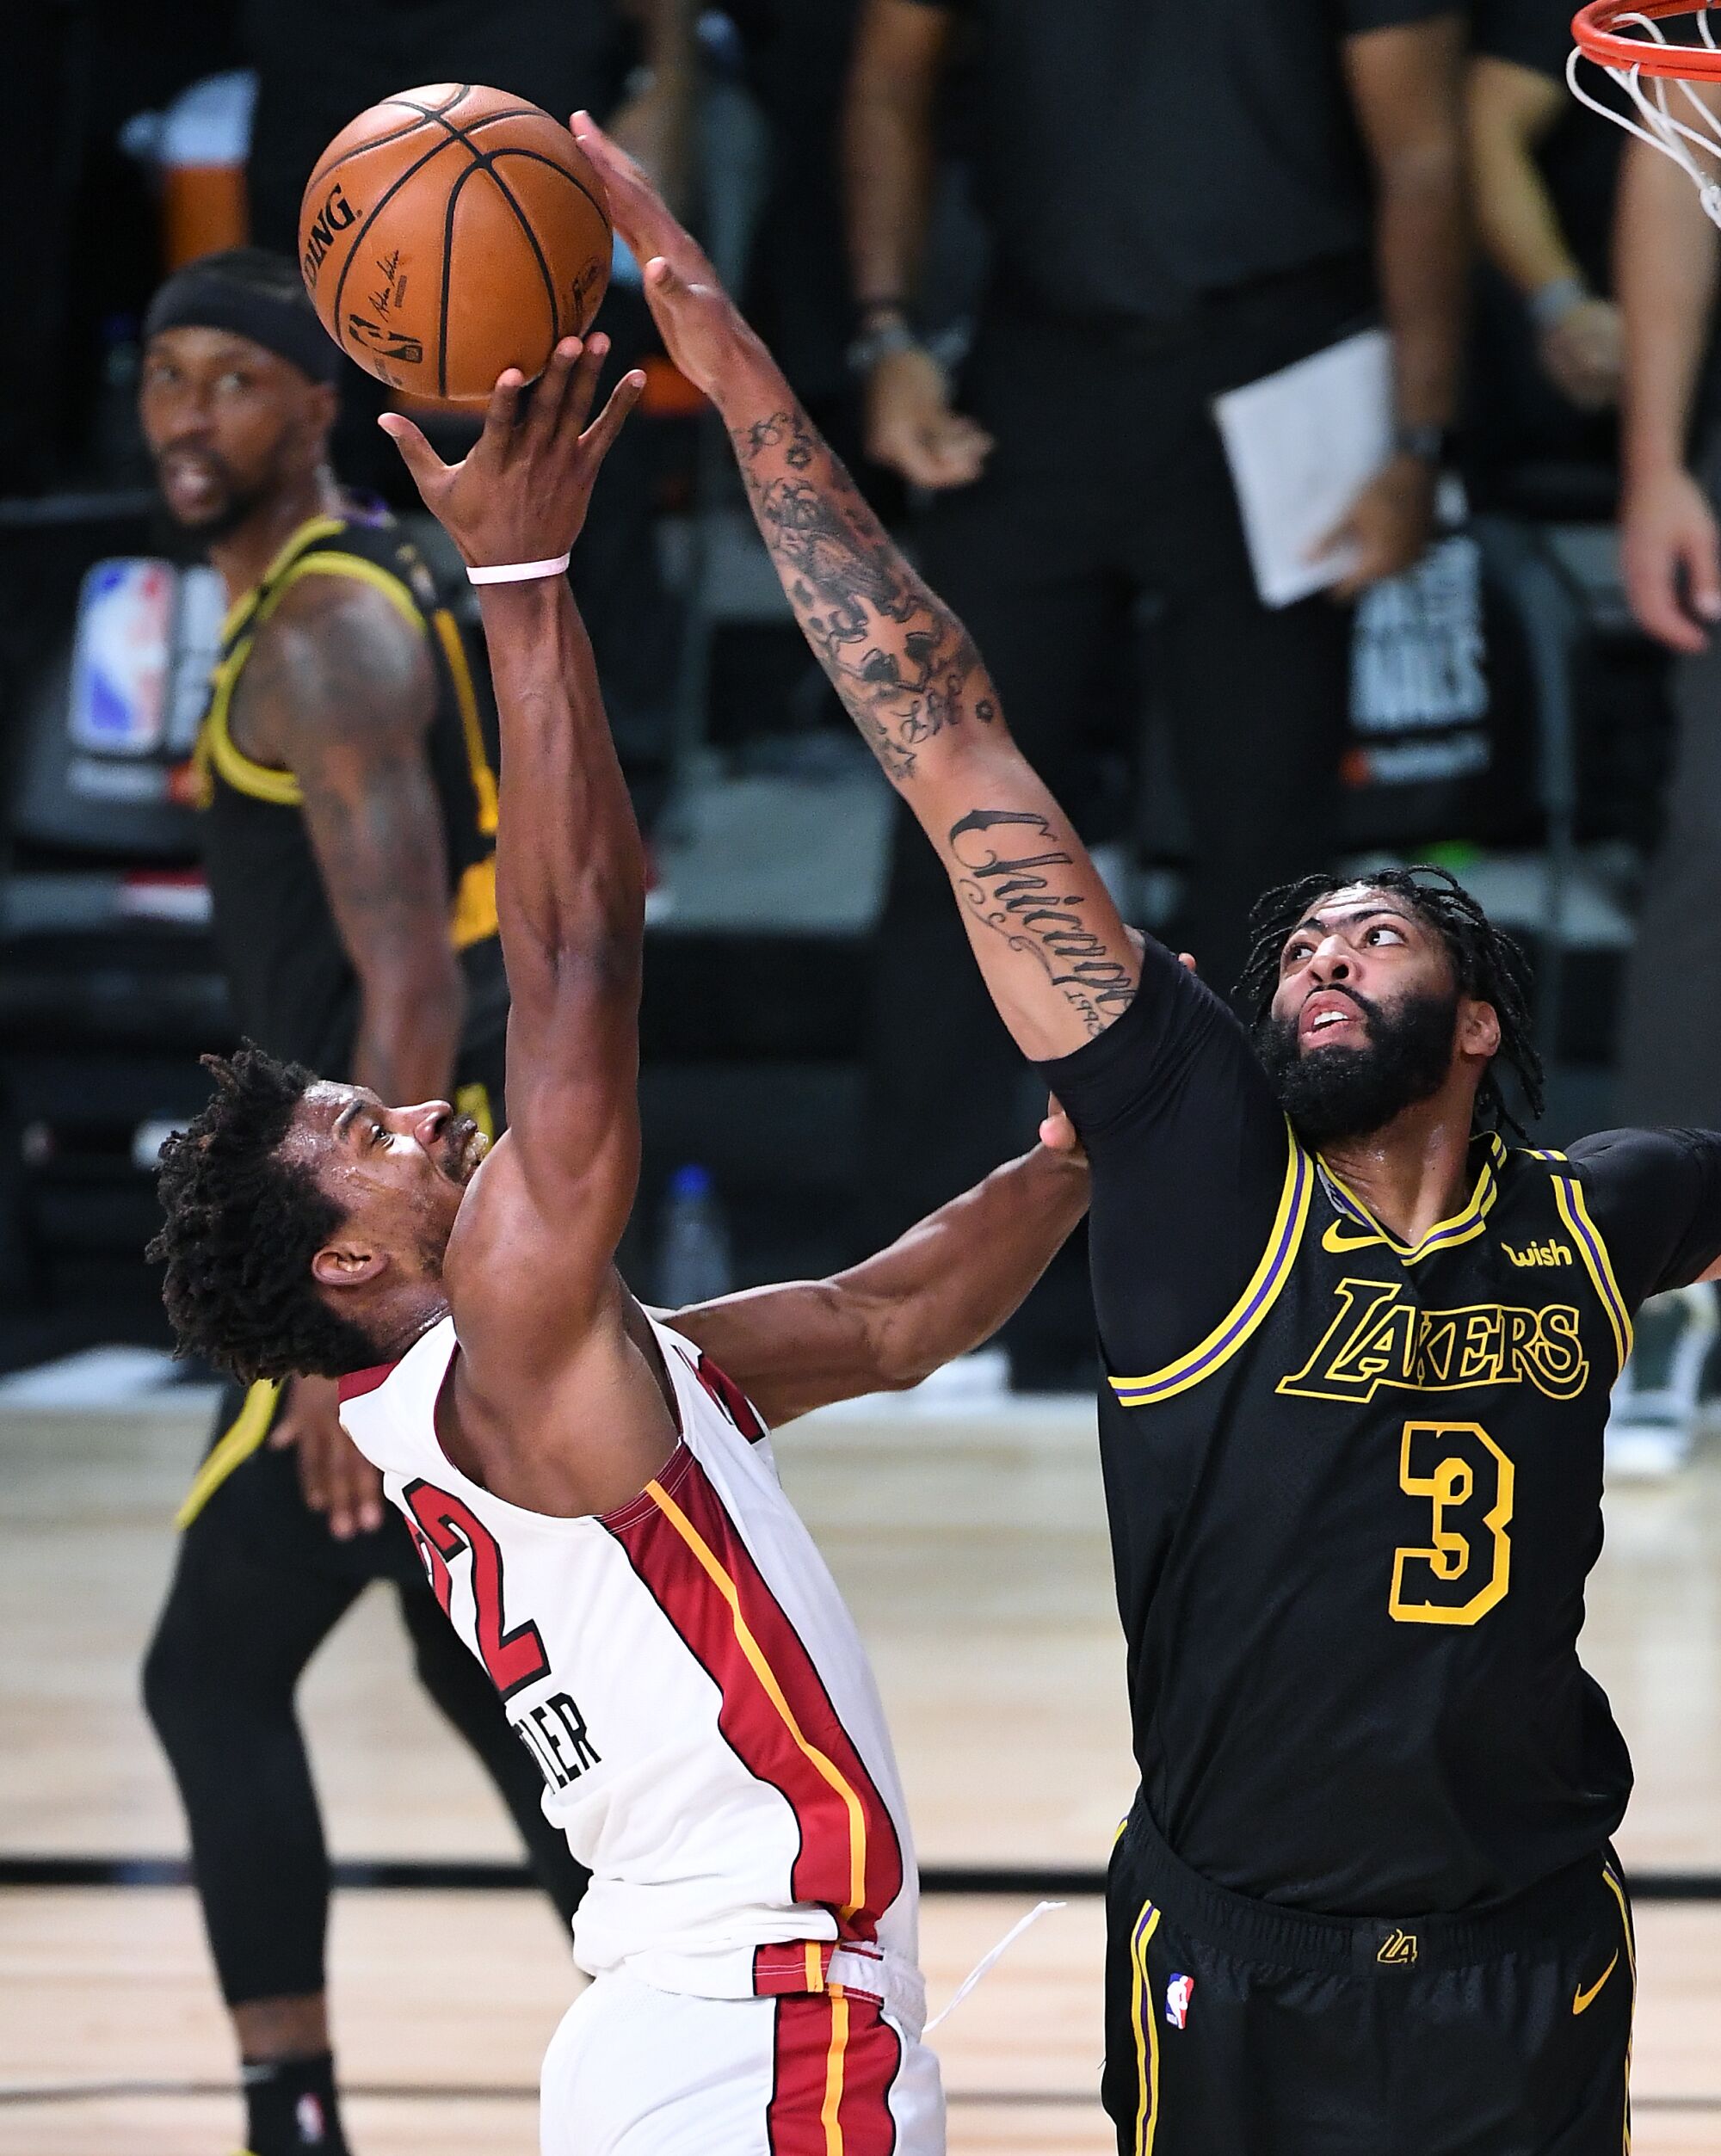 Lakers forward Anthony Davis blocks a shot by Miami Heat forward Jimmy Butler during the first quarter of Game 5.